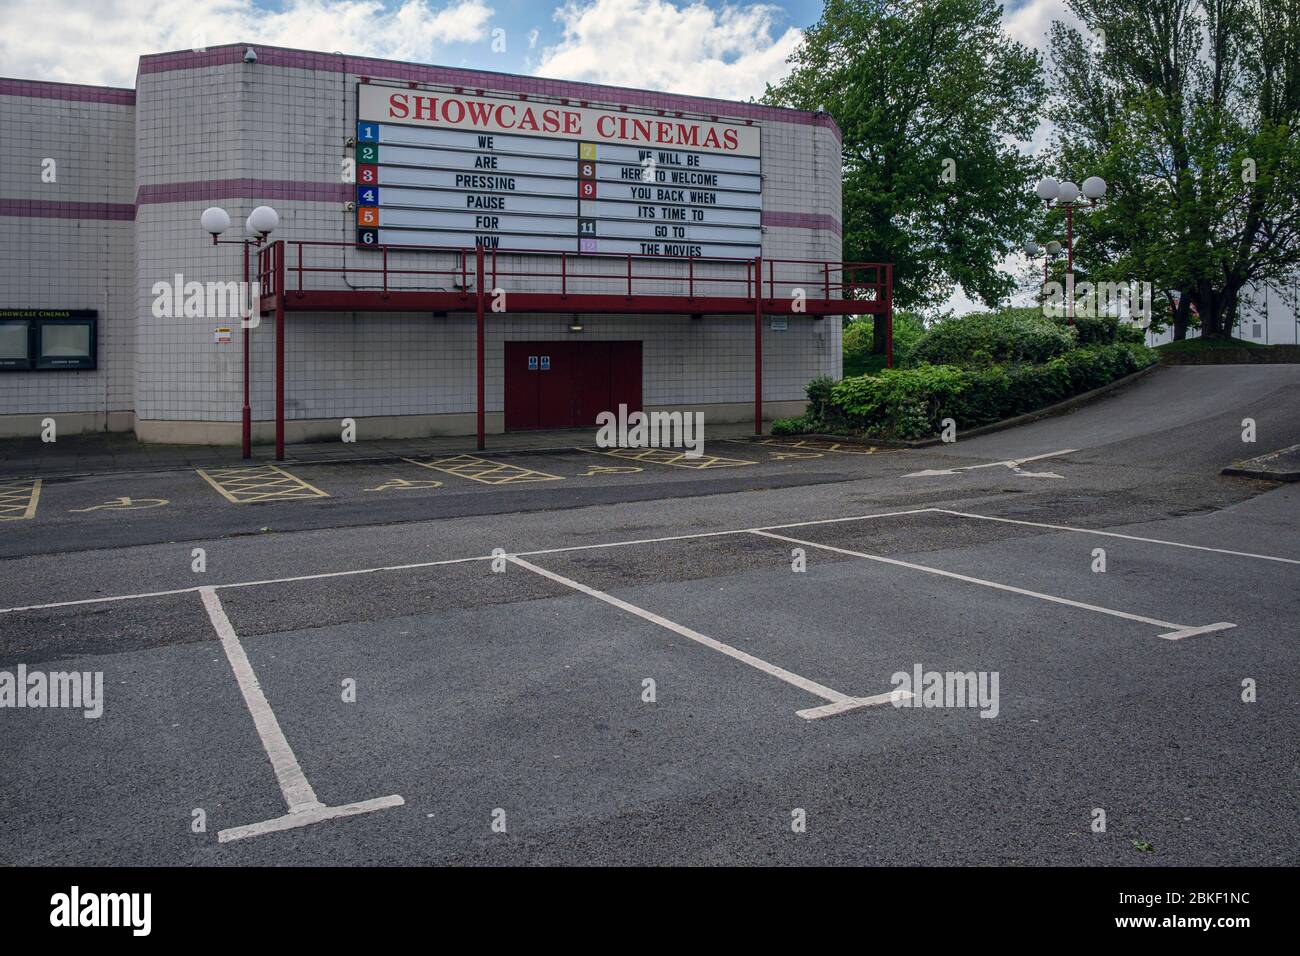 Message on a cinema which was closed during the coronavirus pandemic lockdown, Derby, England, May 2020 Stock Photo